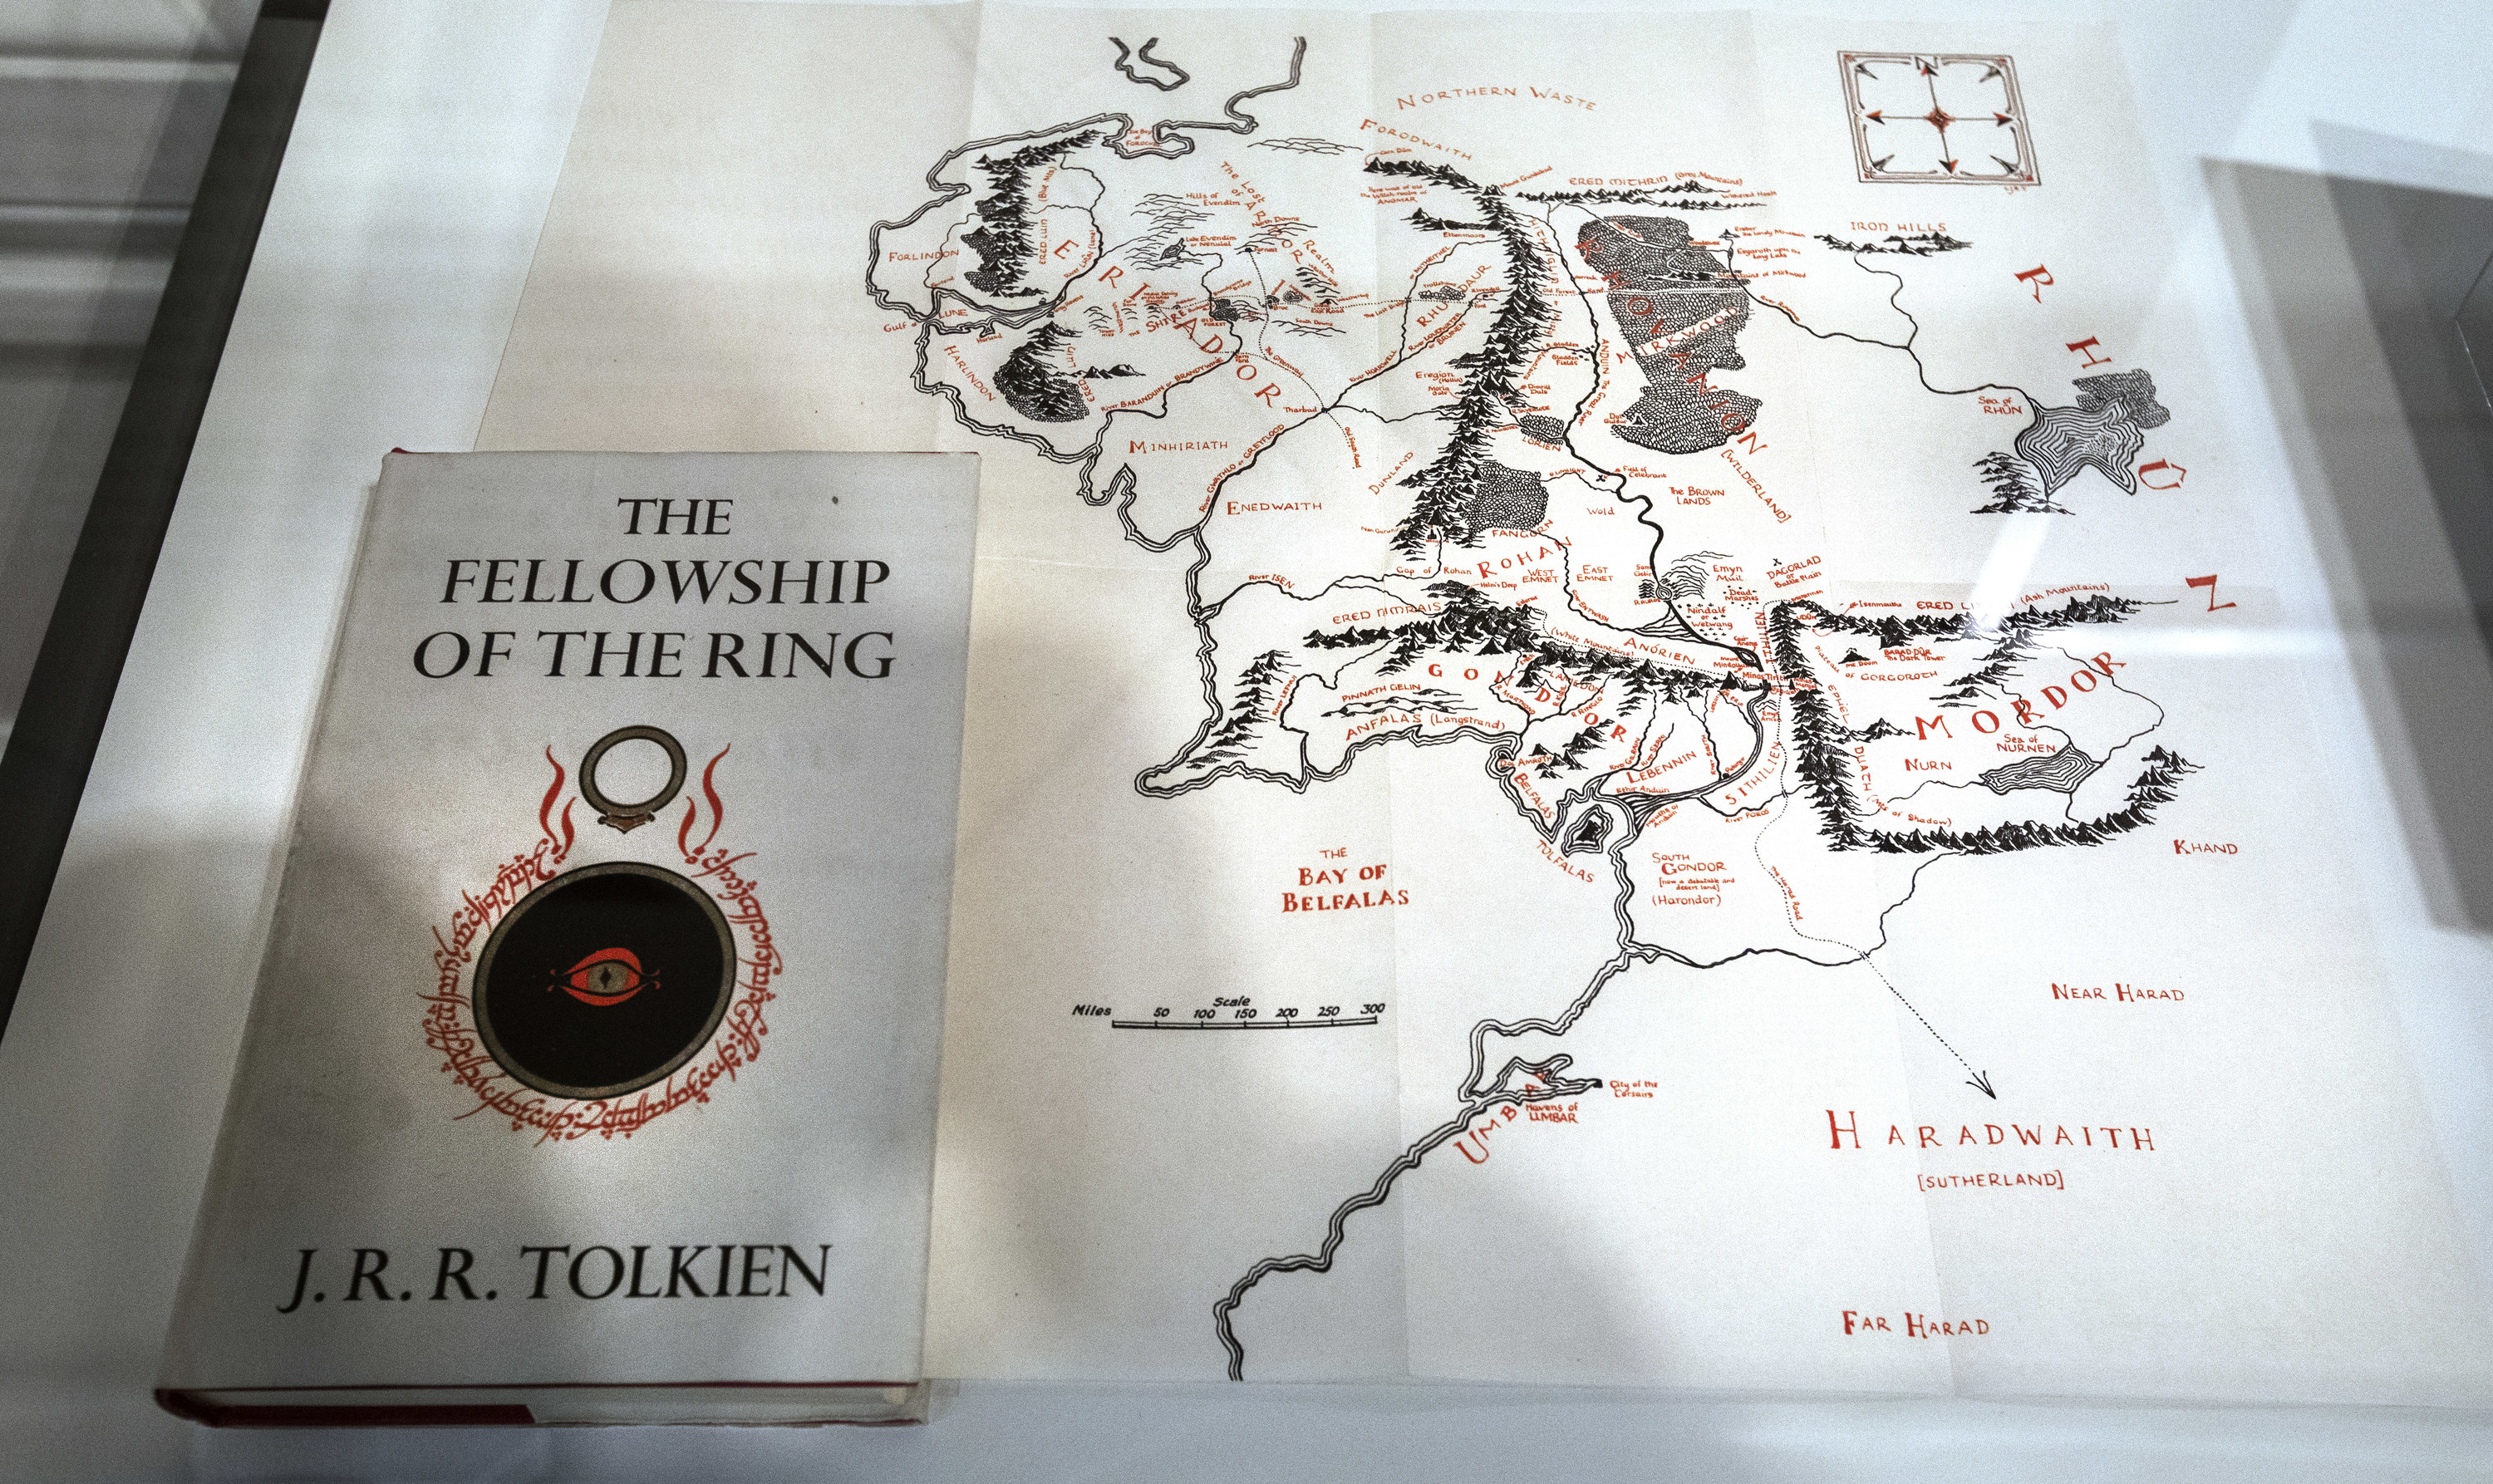 A copy of The Fellowship of the Ring sitting on a map of Middle Earth